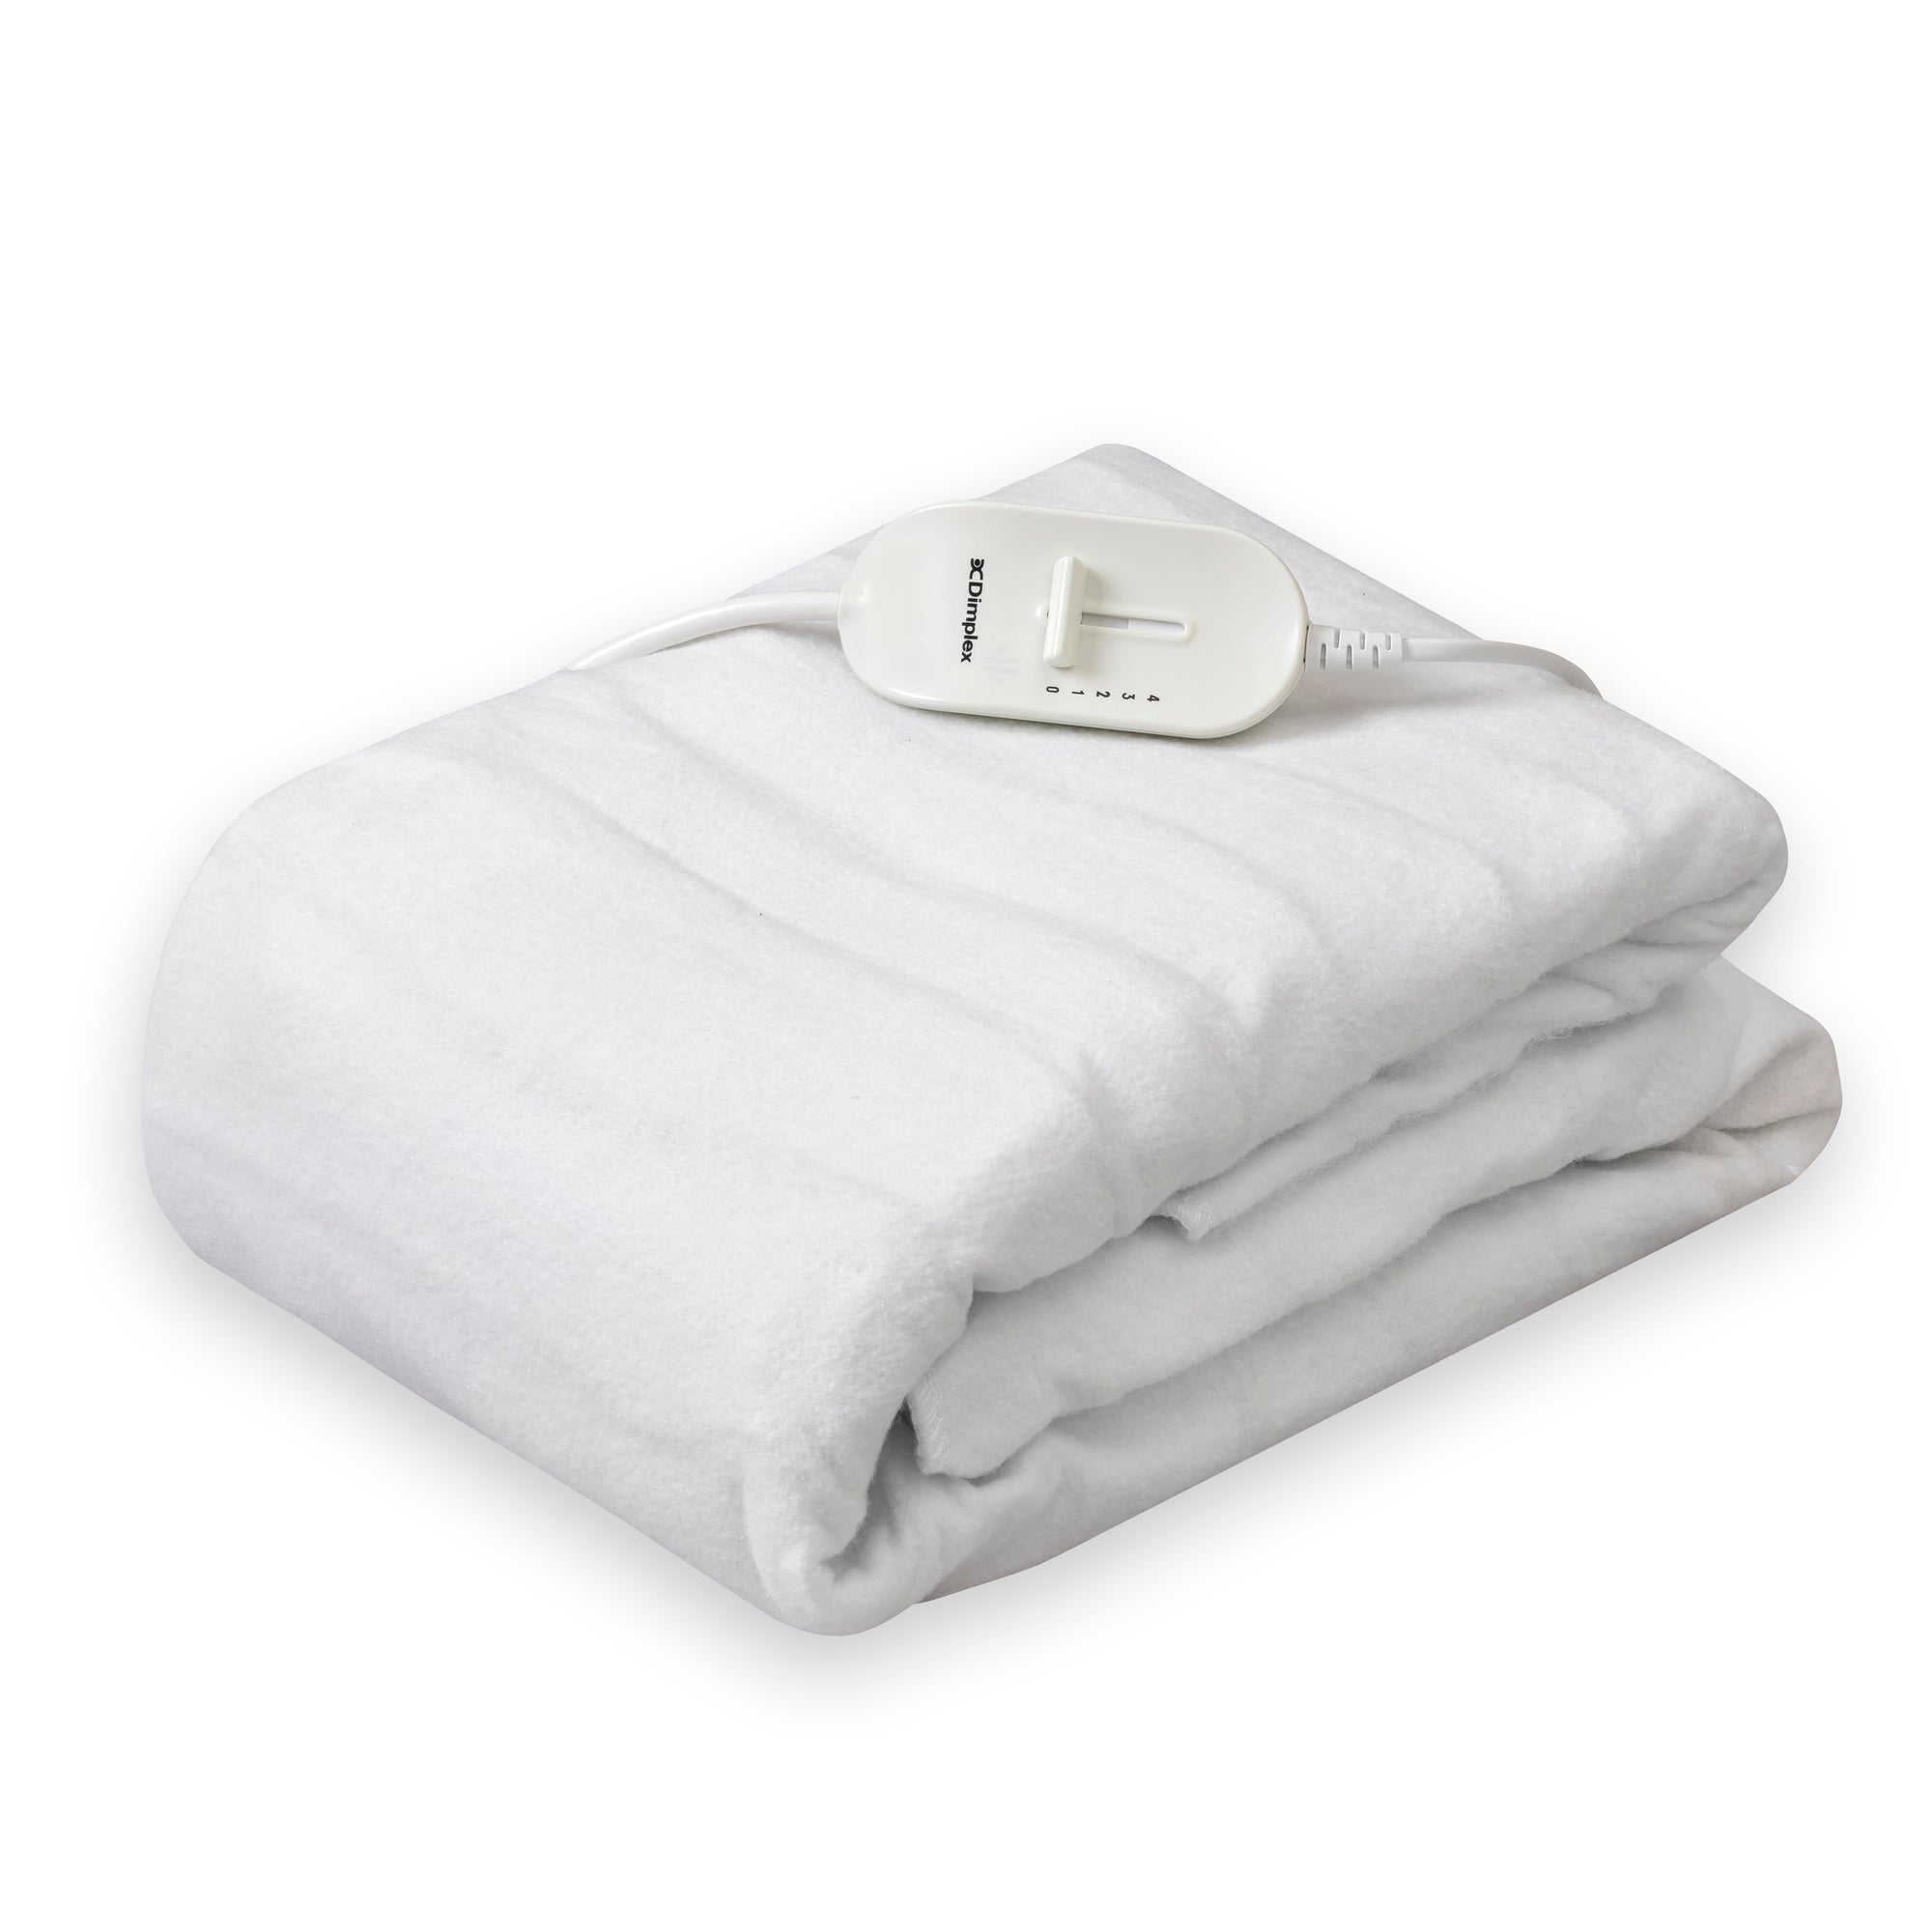 Dimplex King Size Washable Electric Heated Underblanket - White | DUB1003 from Dimplex - DID Electrical